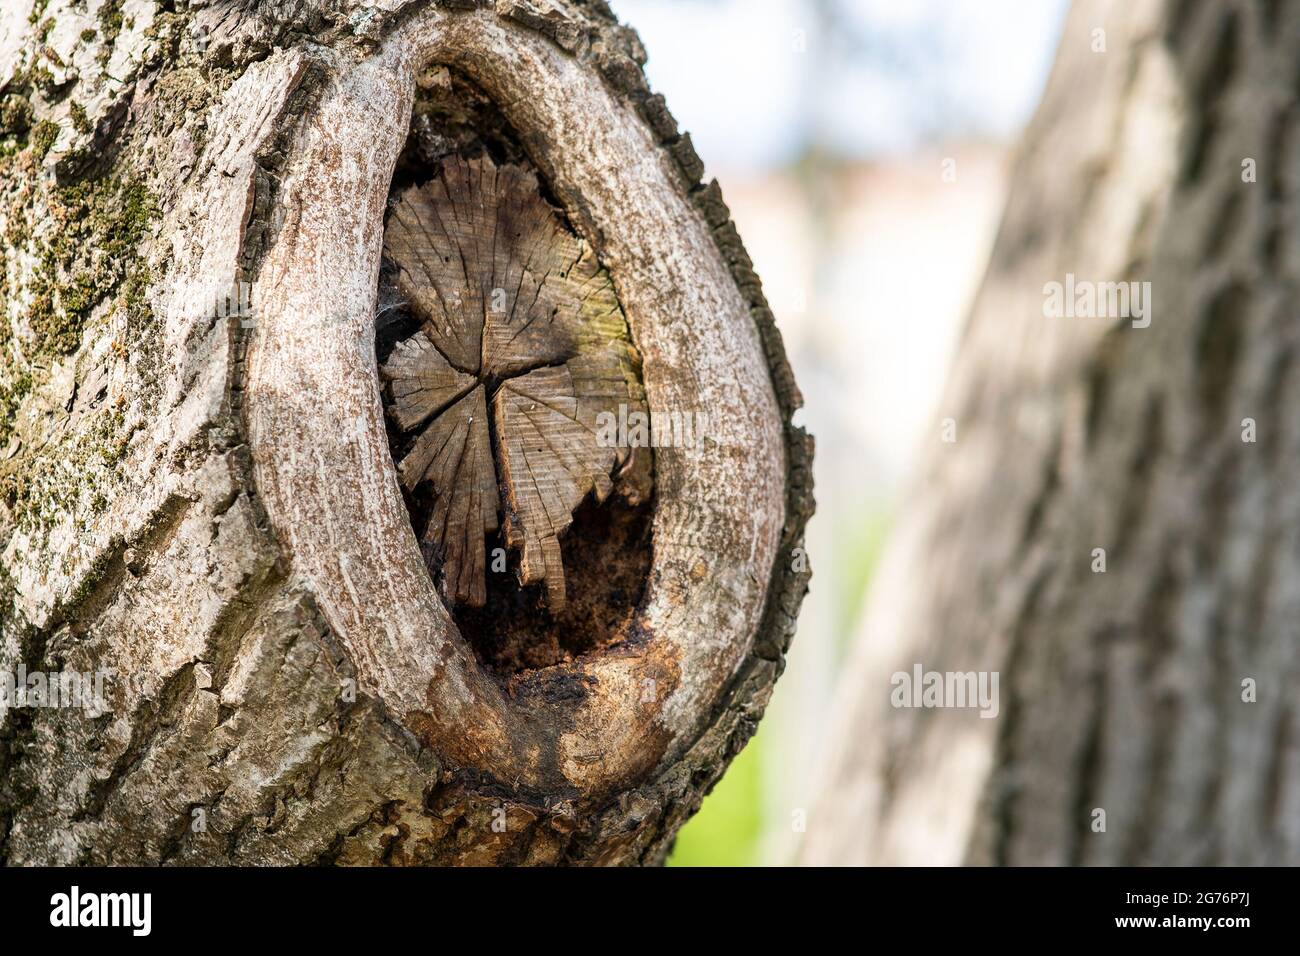 Close up view of old chopped off tree branch. Stock Photo